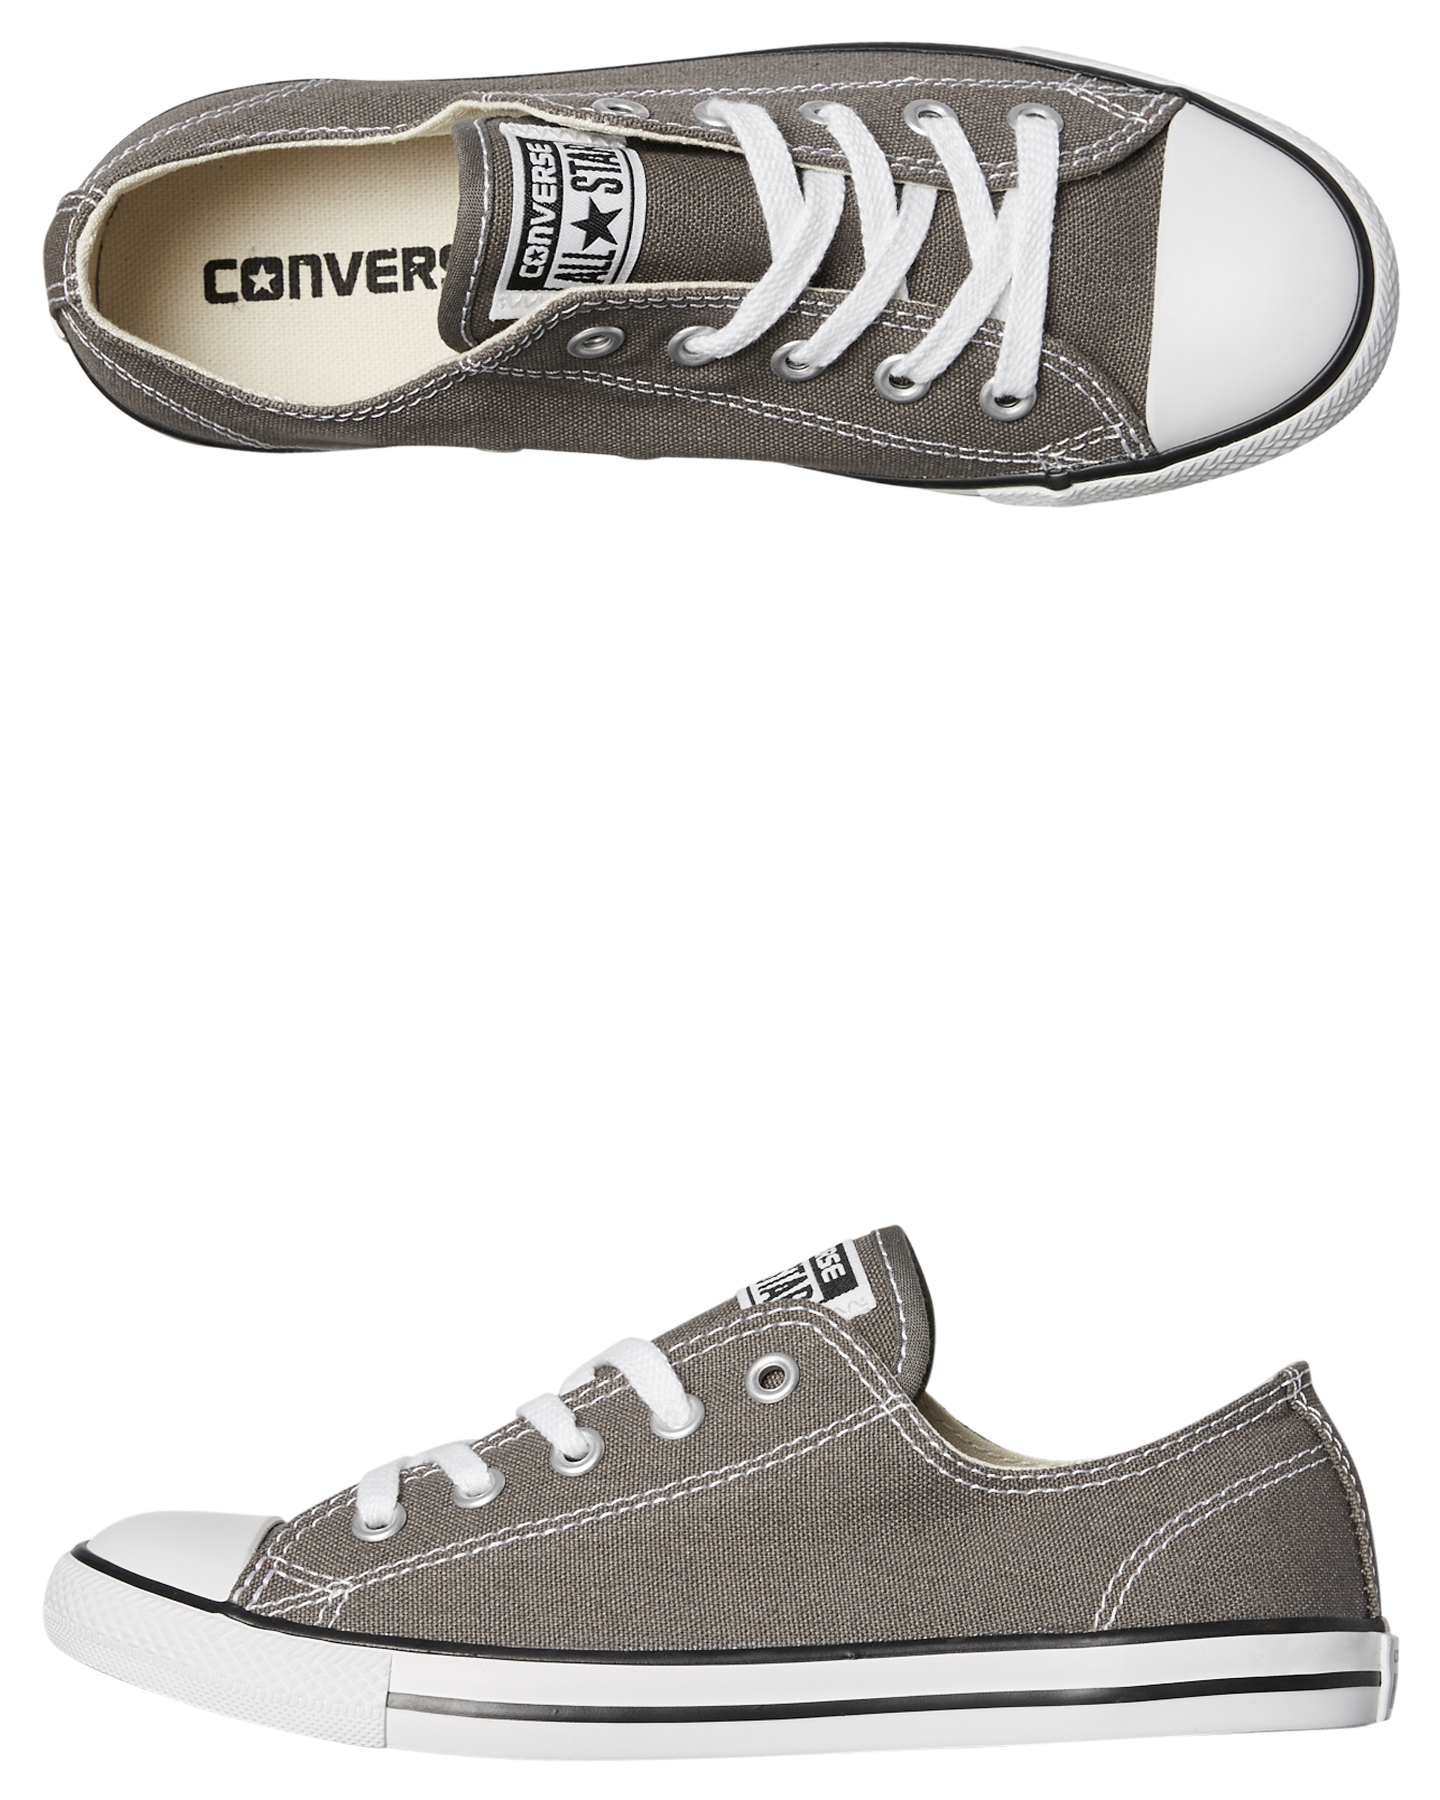 converse dainty charcoal